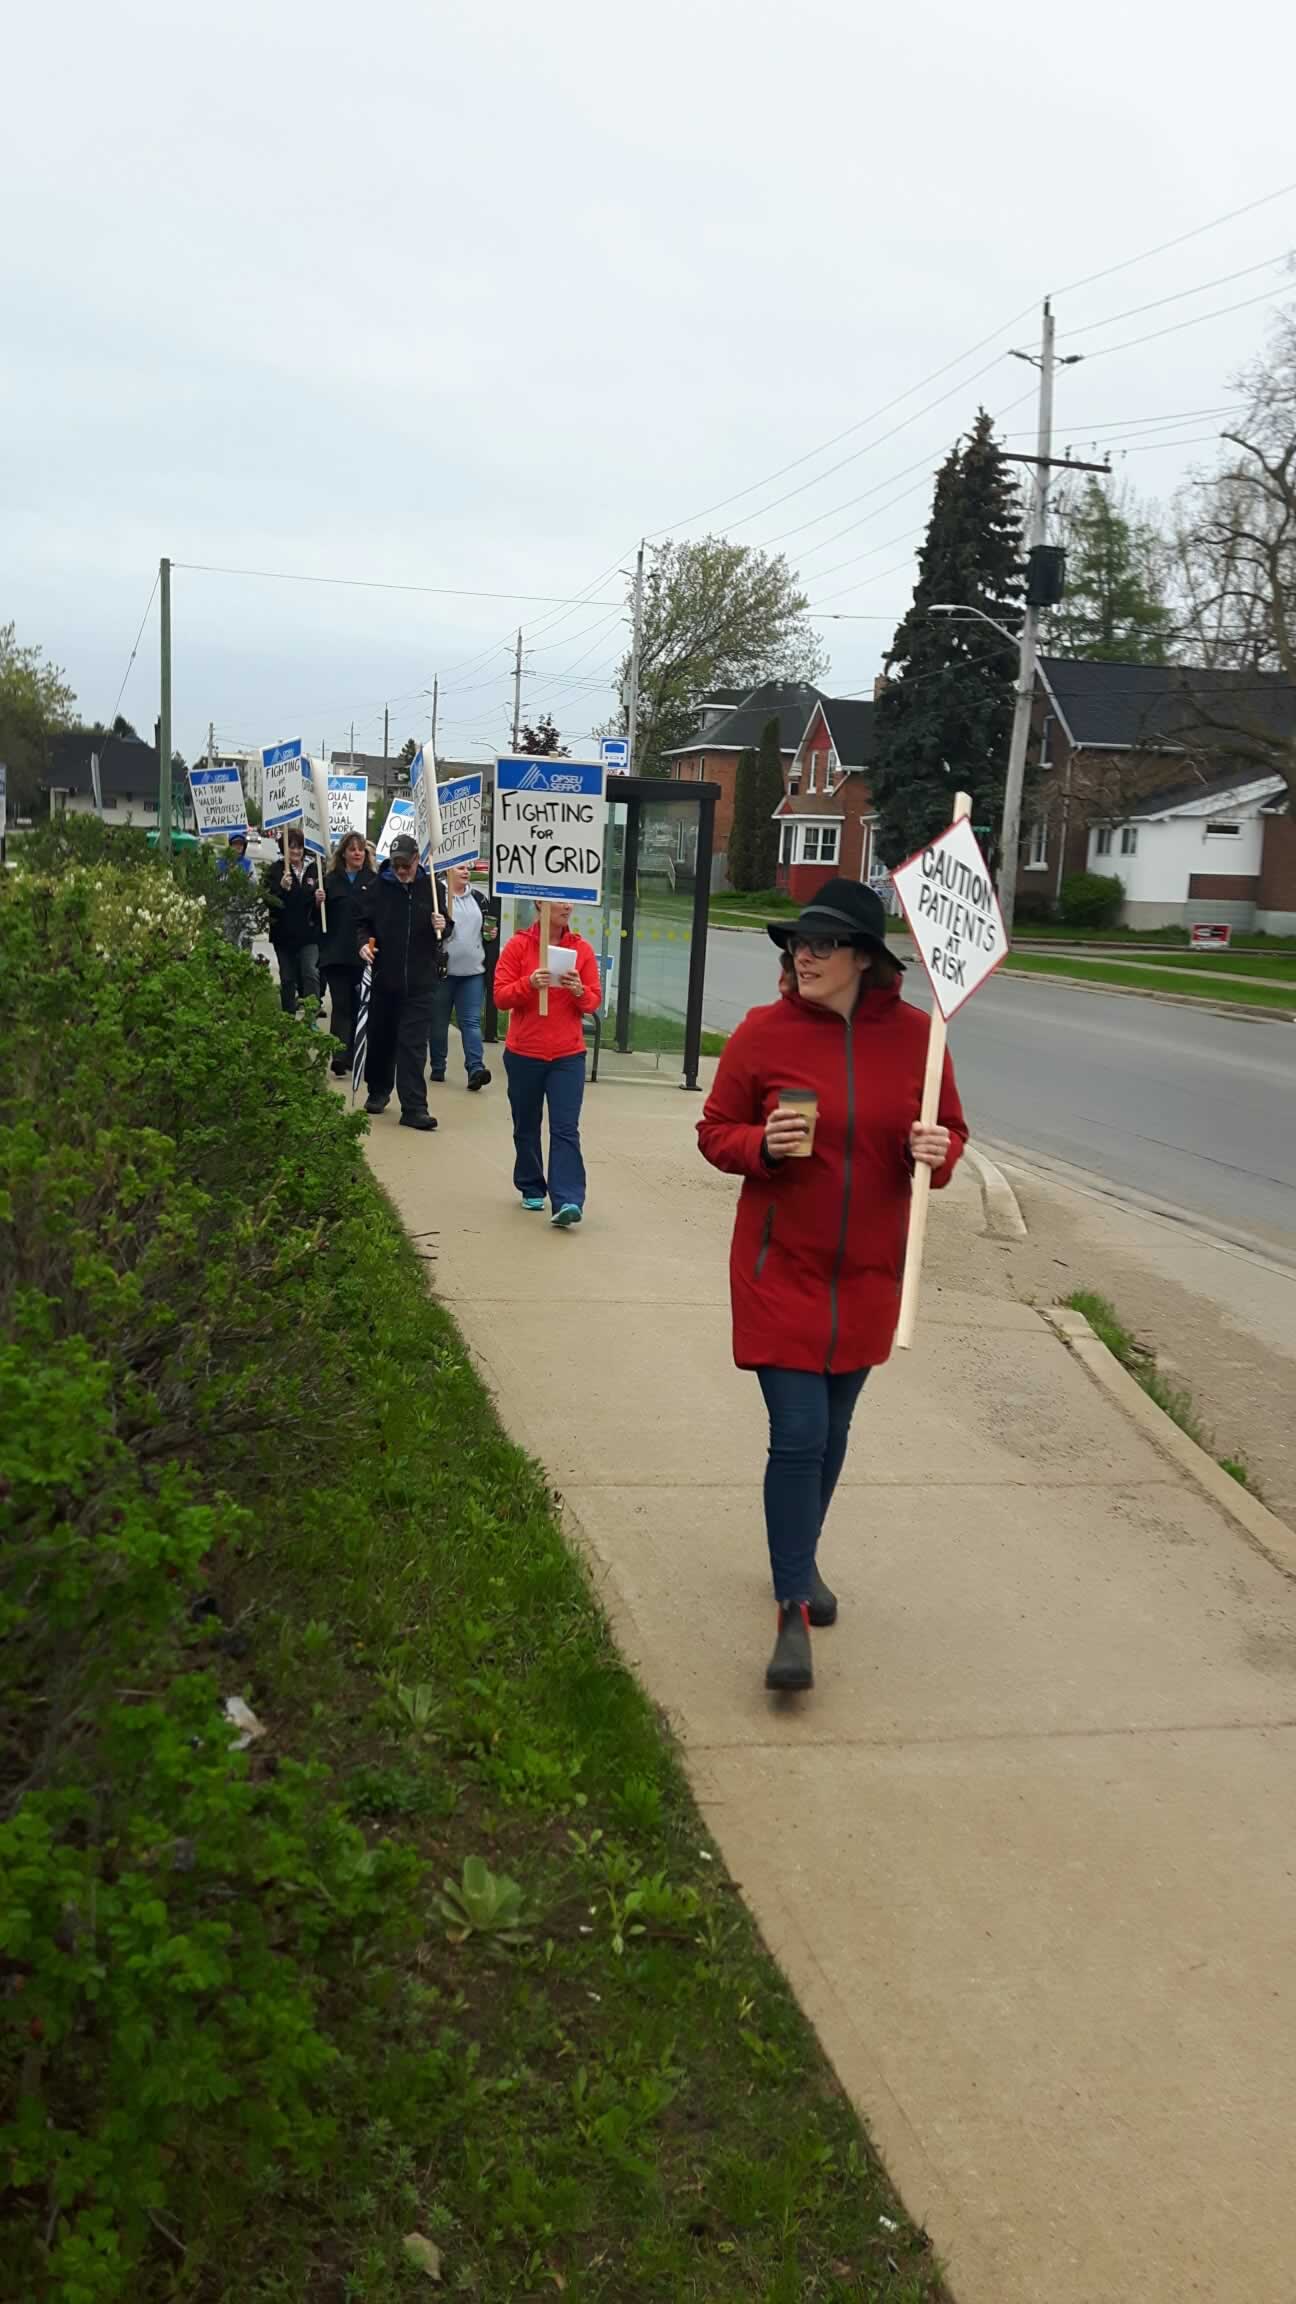 OPSEU/SEFPO members holding signs